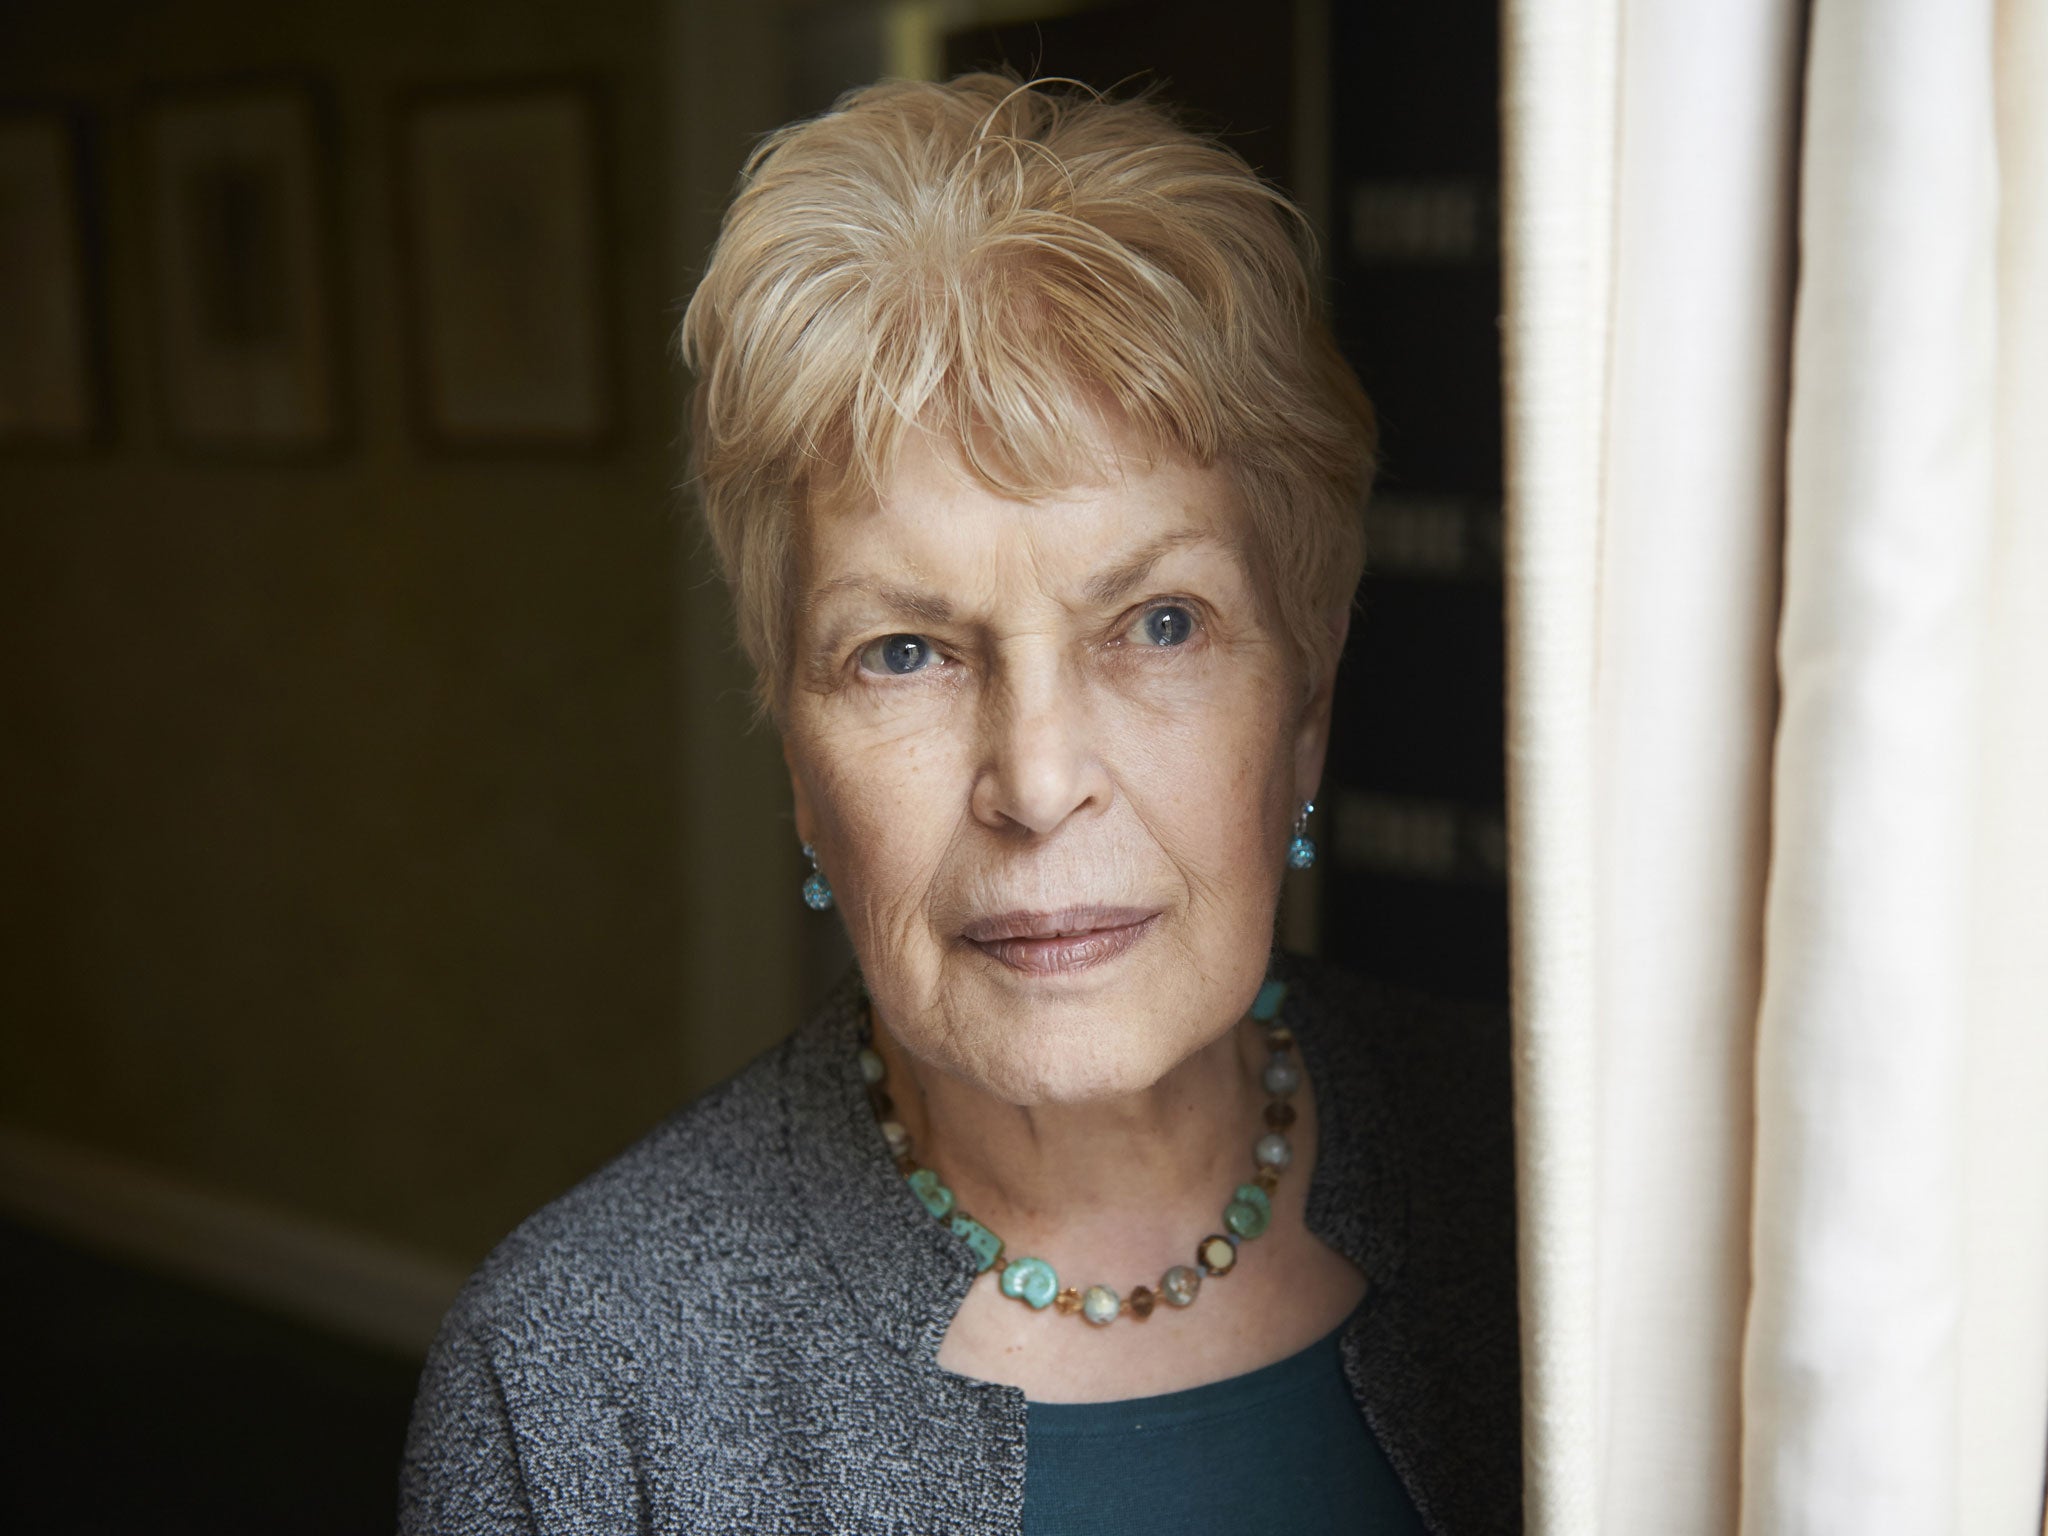 Dark Corners is the final novel by the late Ruth Rendell